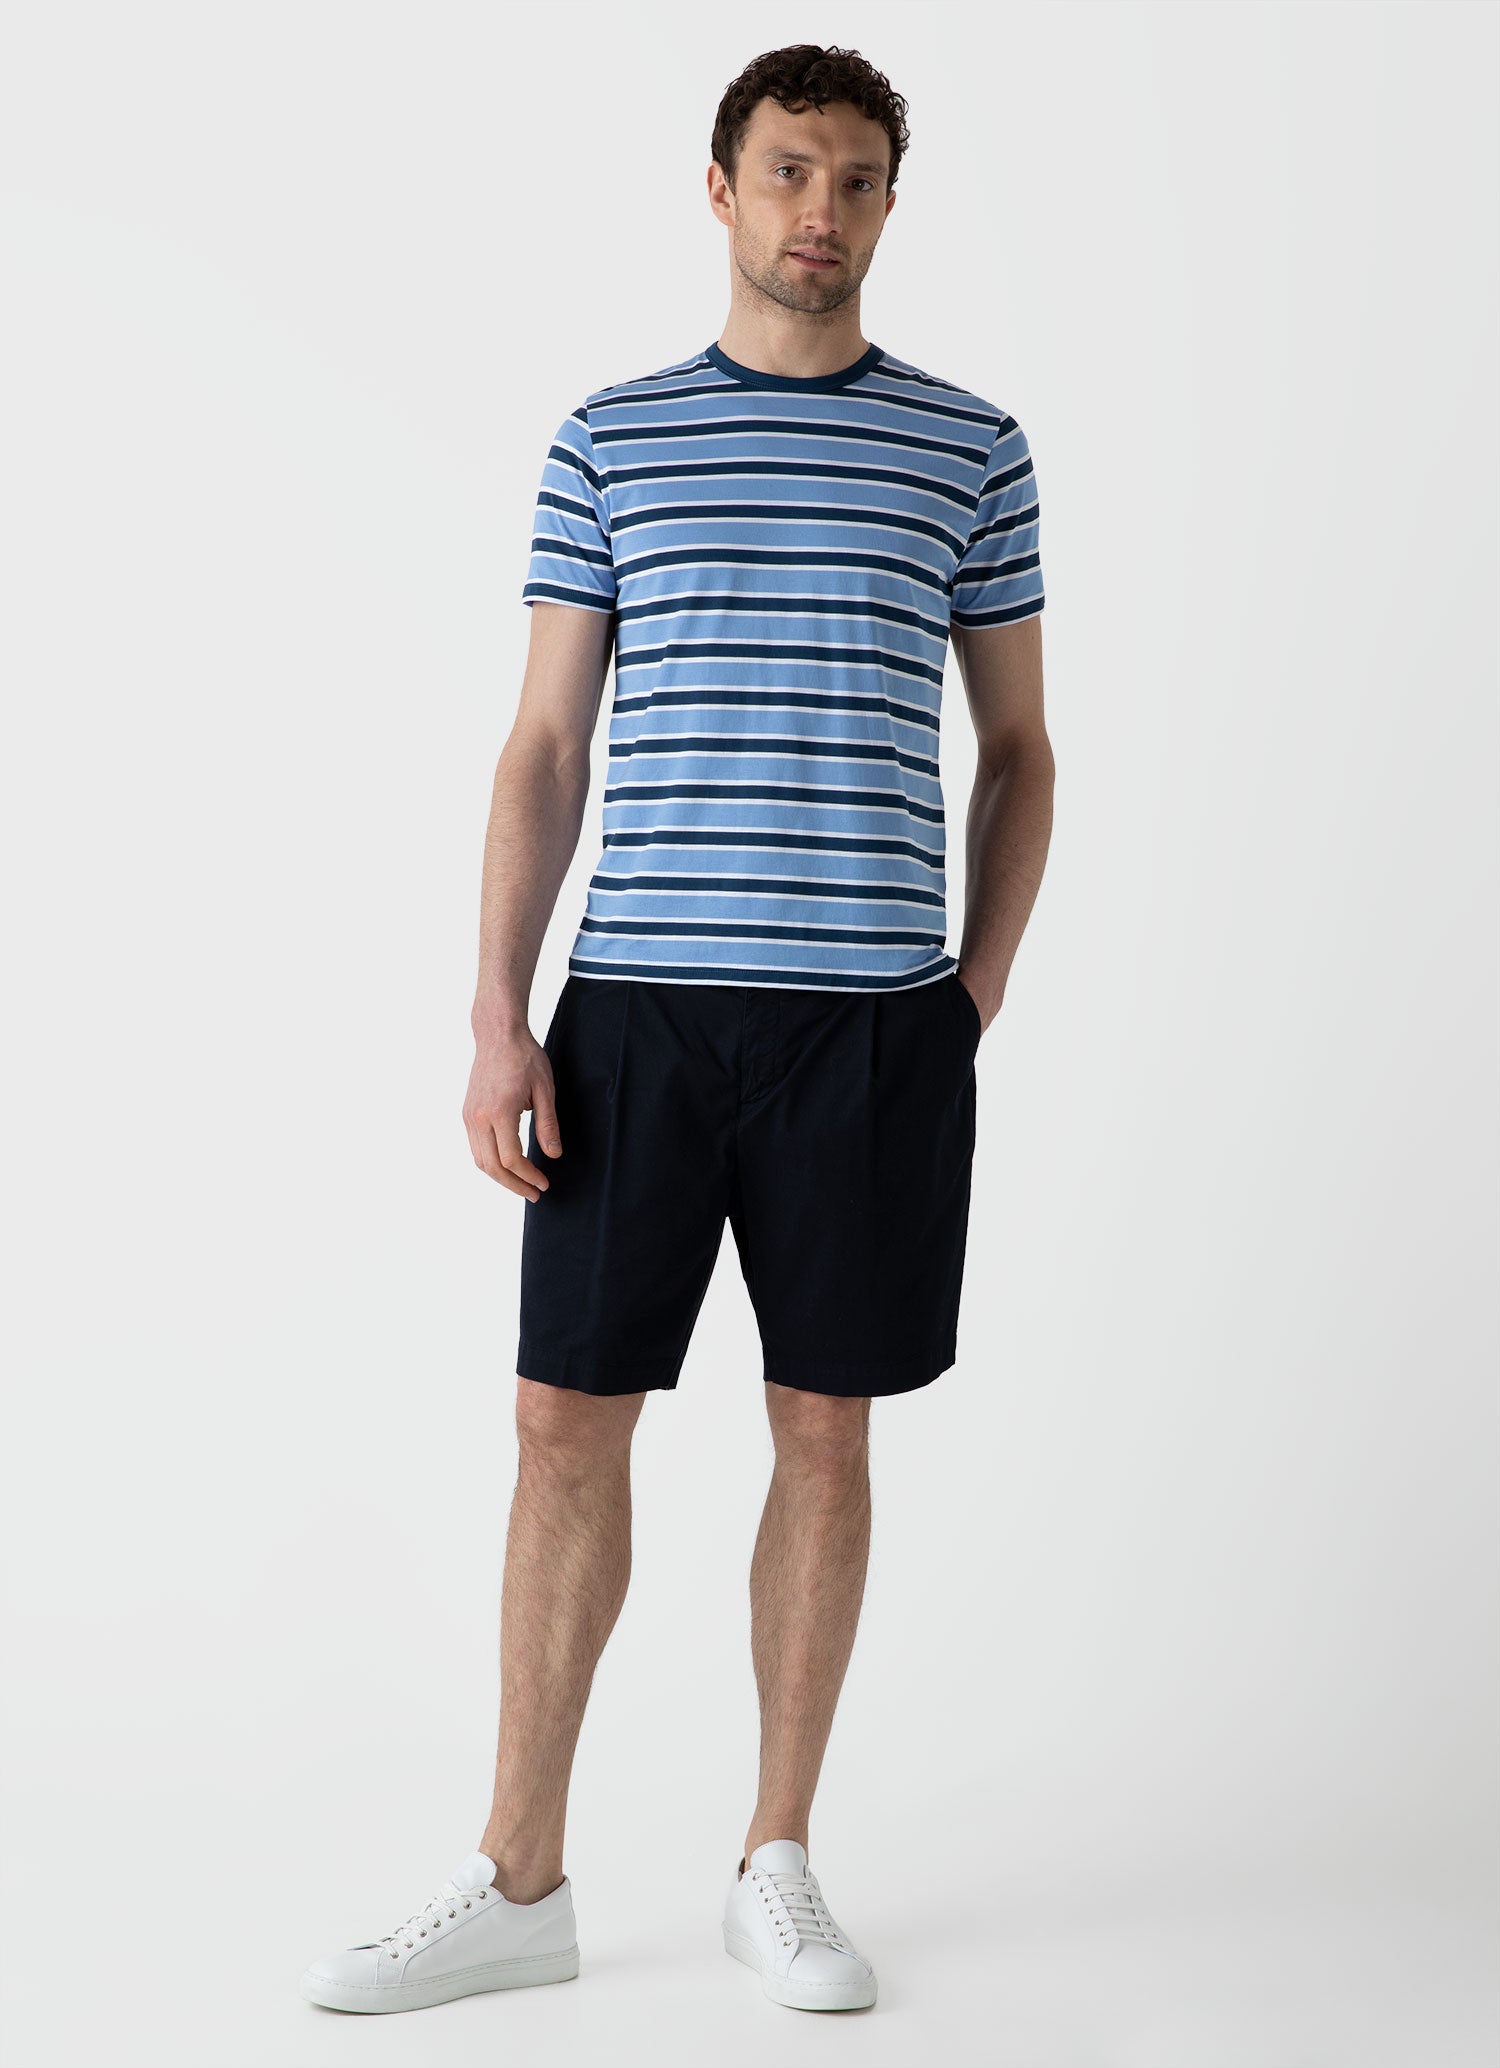 Men's Classic T-shirt in Coast/Cool Blue Holiday Stripe